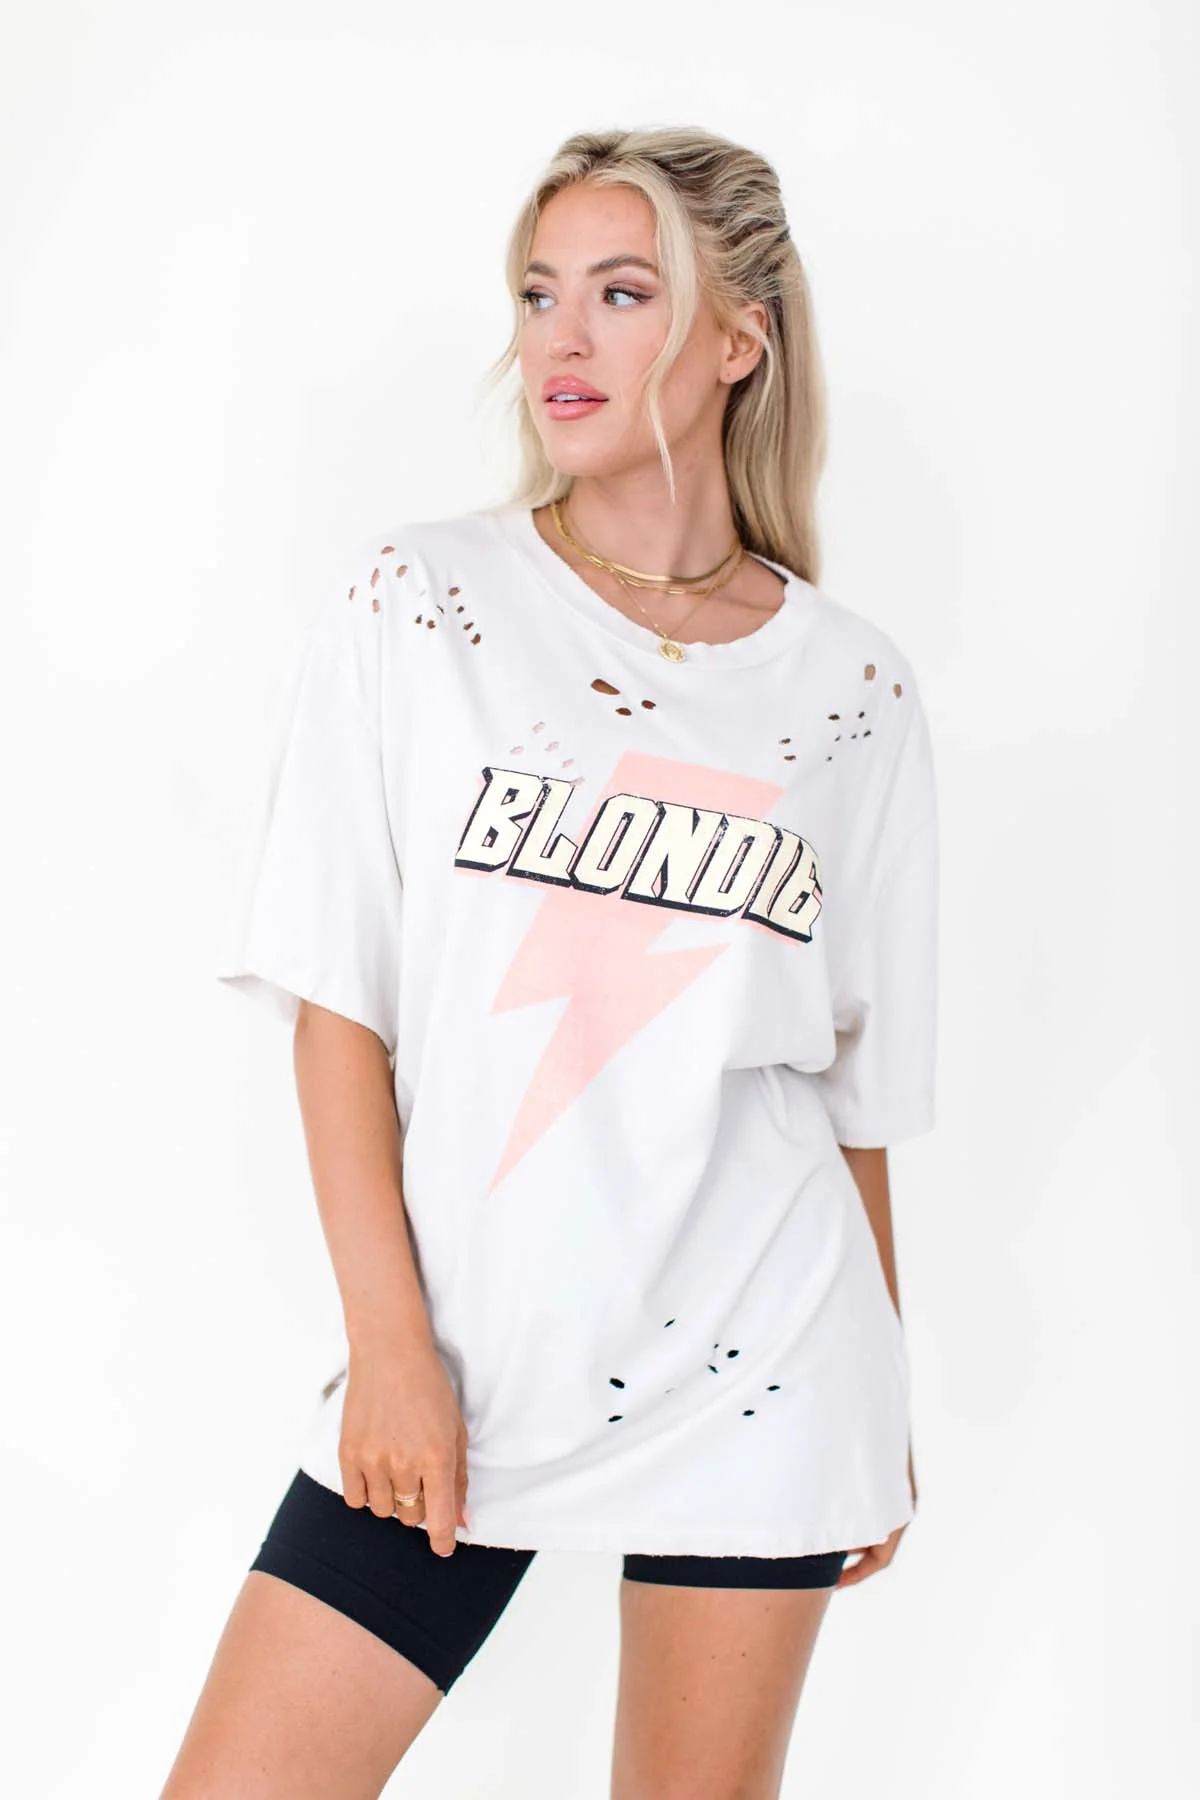 Blondie Distressed Graphic Tee | The Post